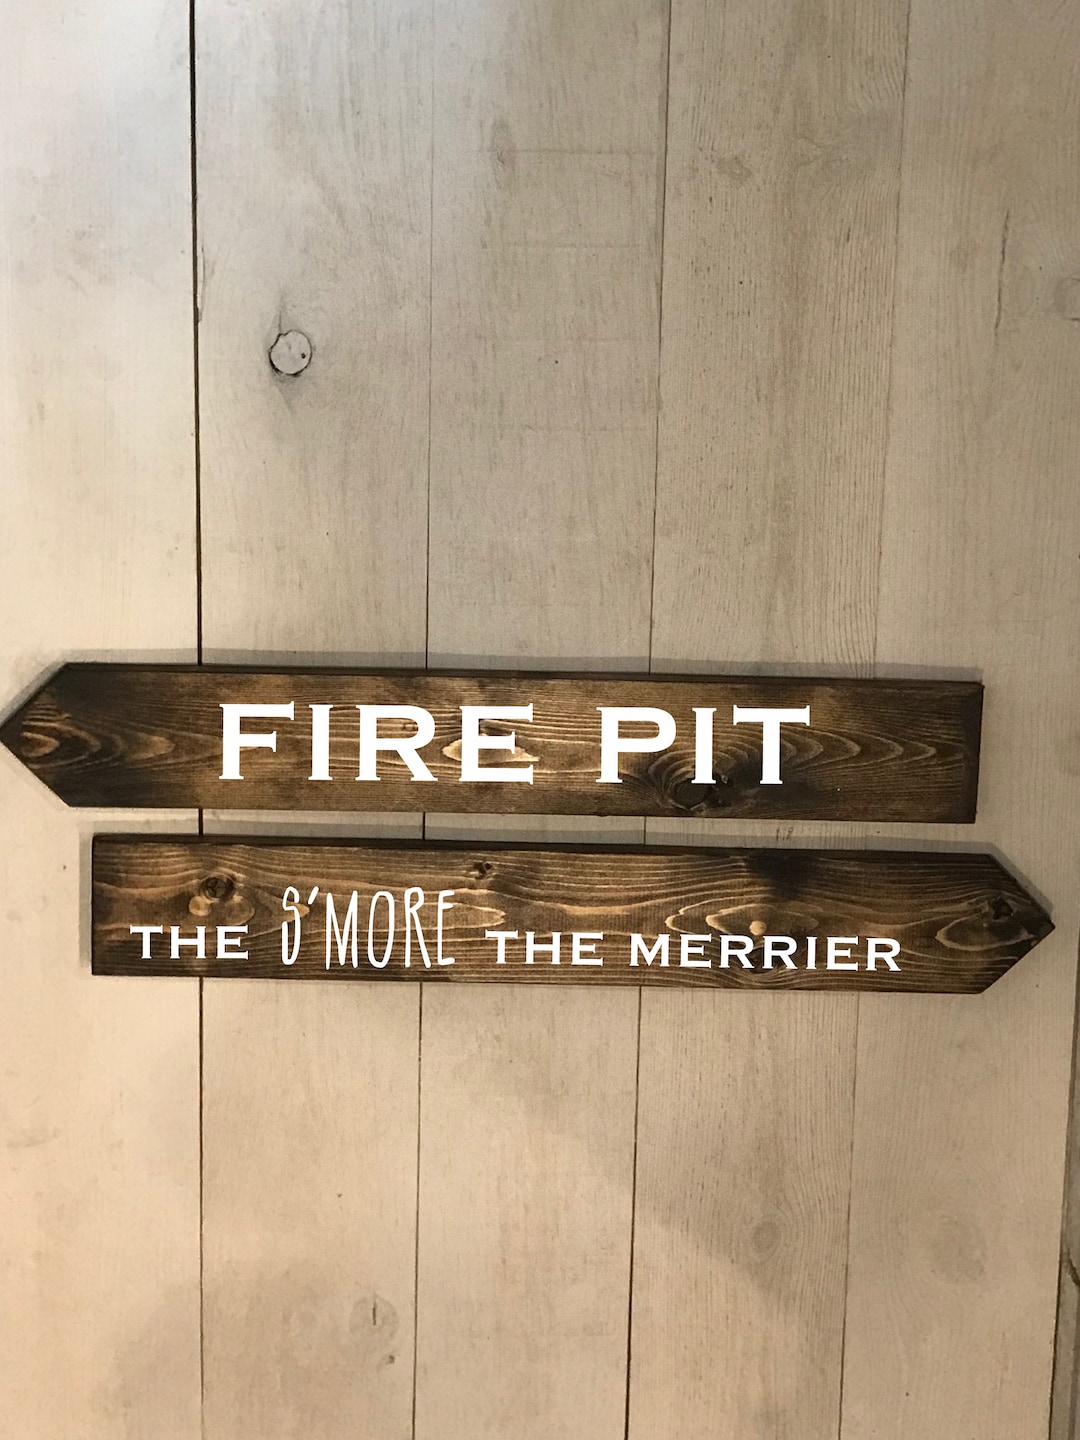 Fire Pit The Smore The Merrier Directional Arrow Signs Etsy